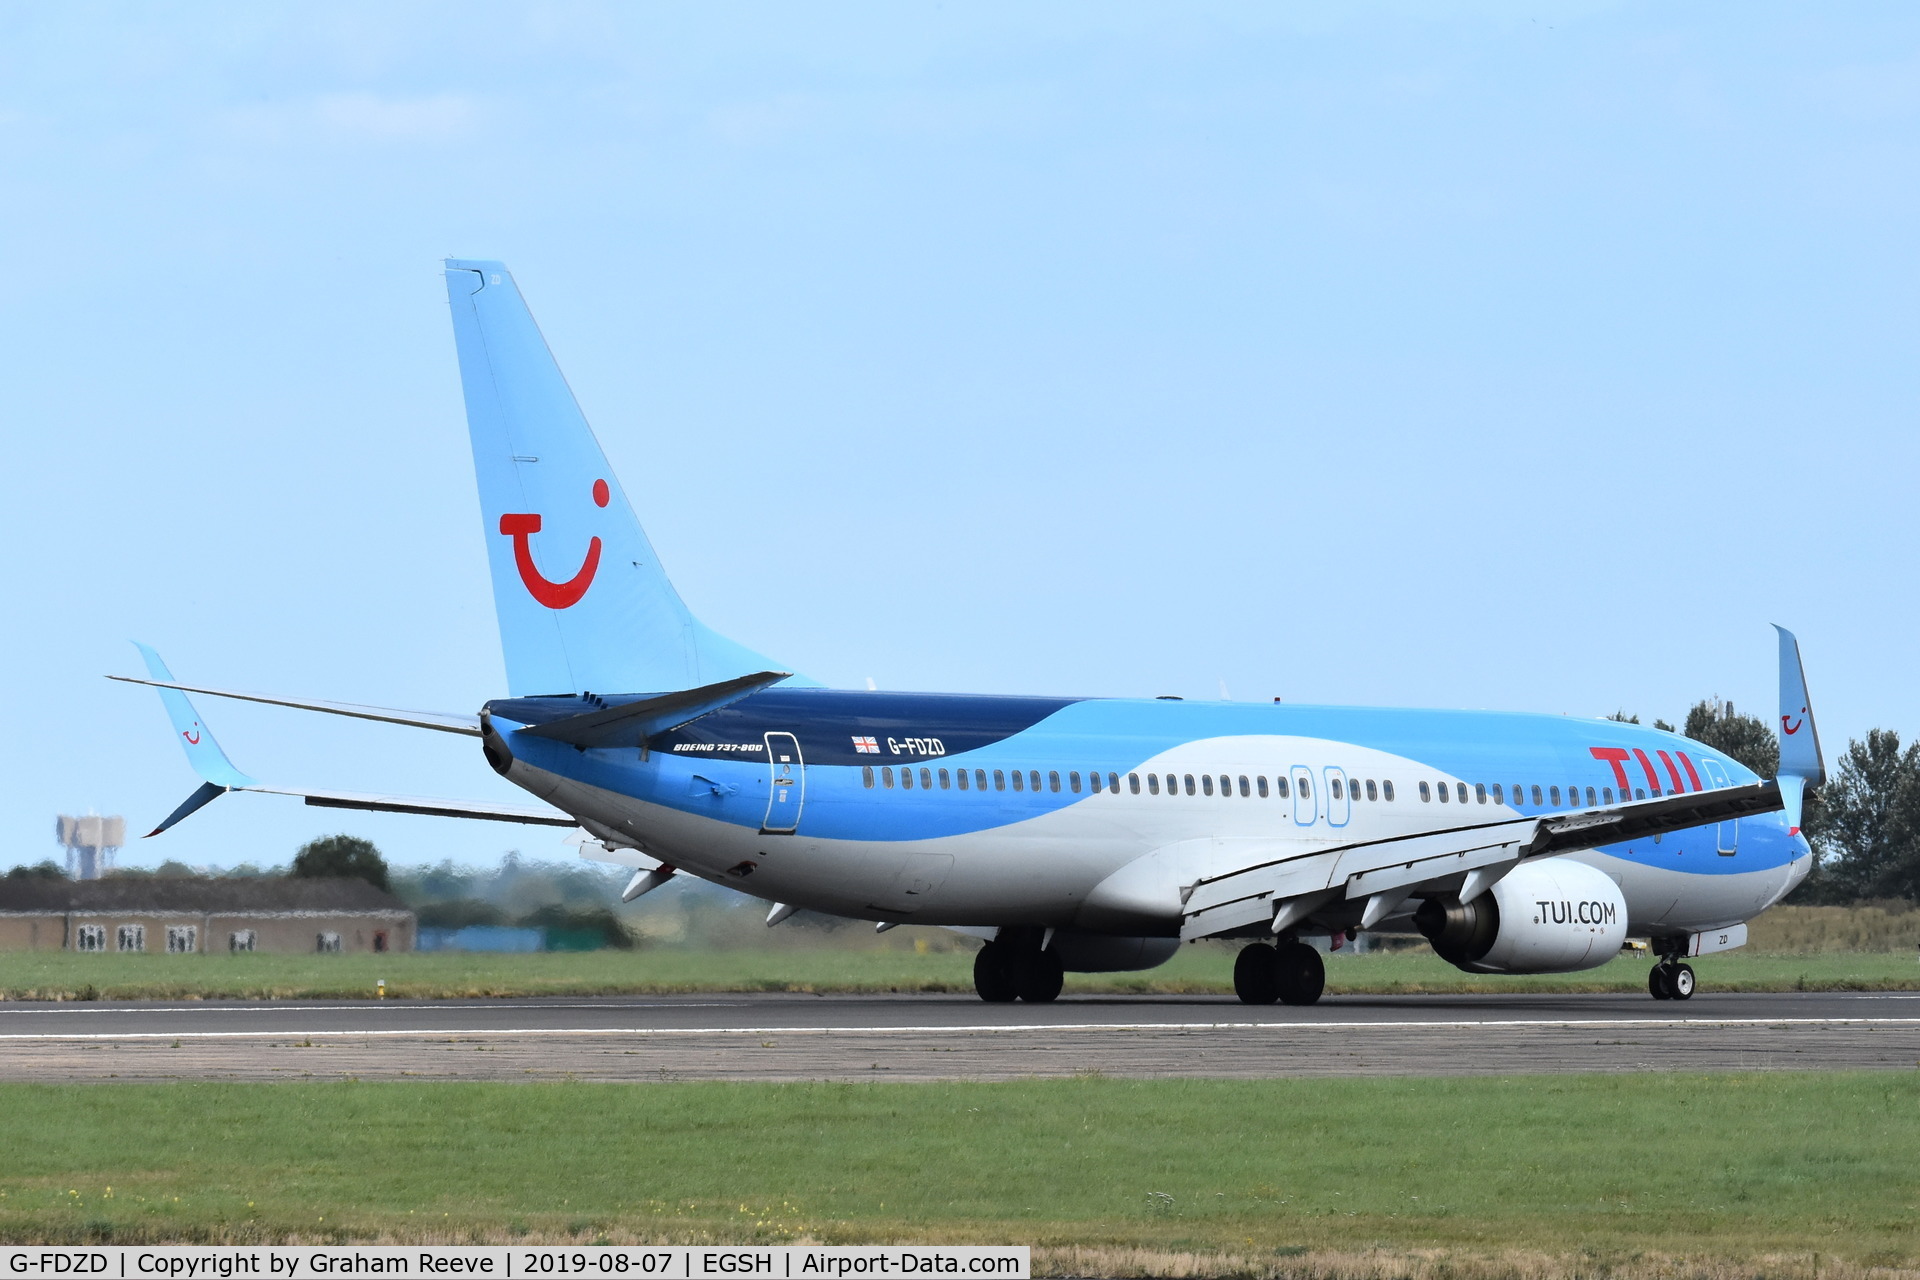 G-FDZD, 2007 Boeing 737-8K5 C/N 35132, Just landed at Norwich.